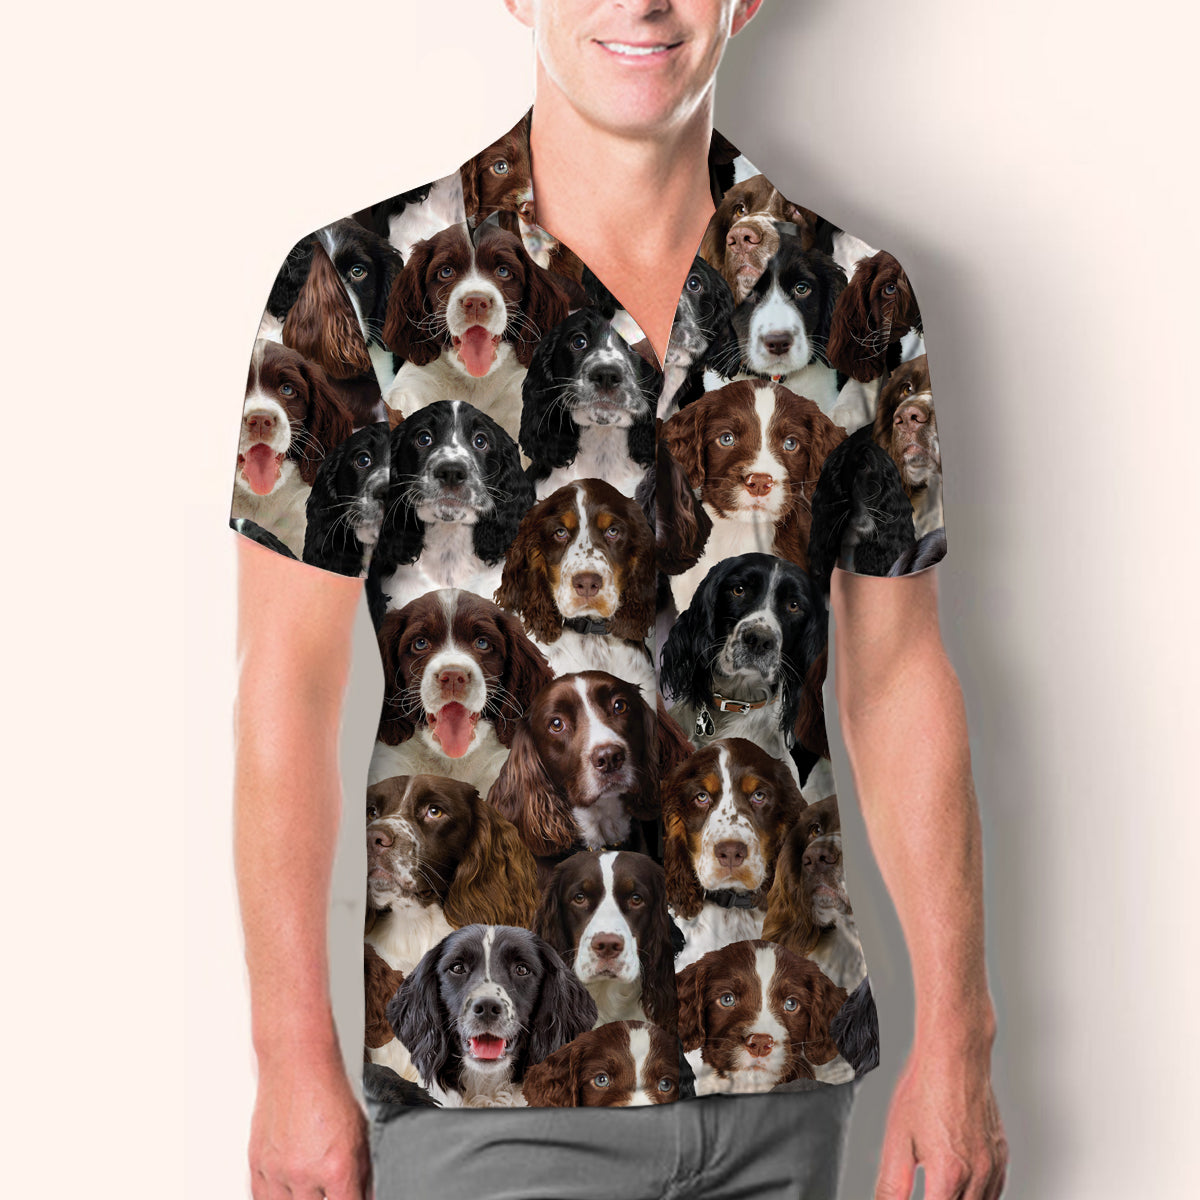 You Will Have A Bunch Of English Springer Spaniels - Shirt V1